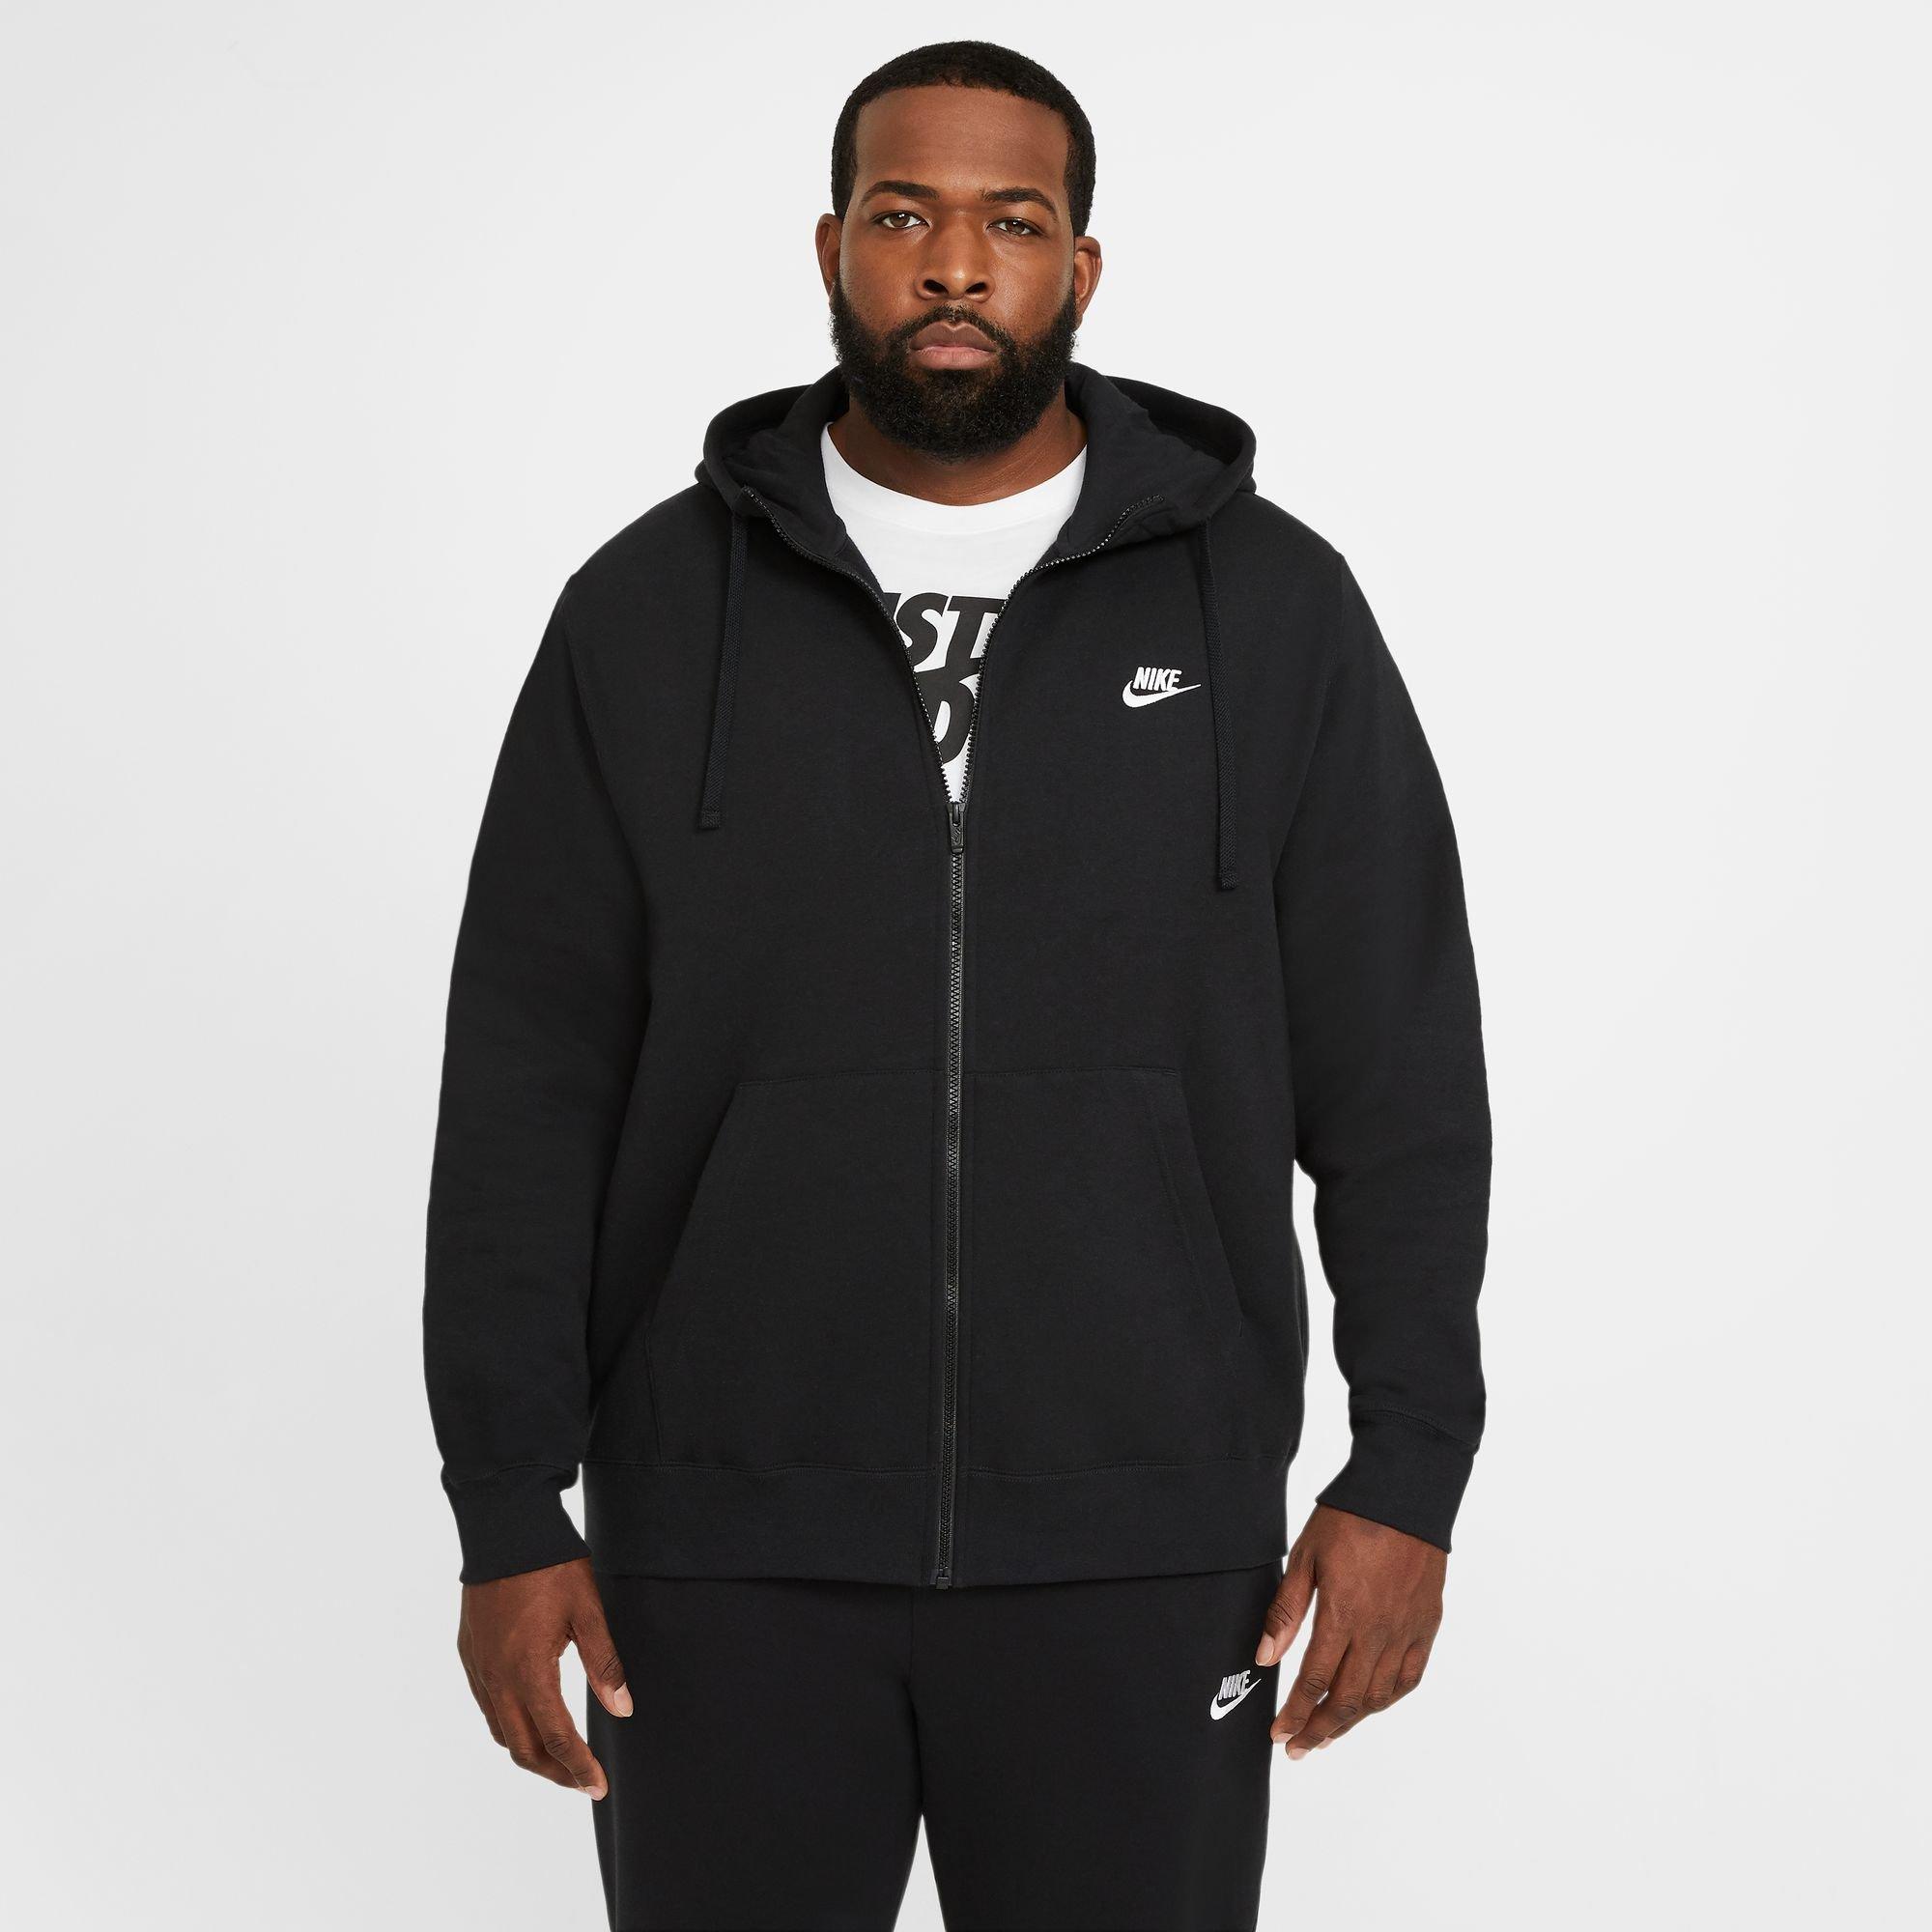 Under Armour Mens Armour Fleece Full-Zip Hoodie - Men from excell